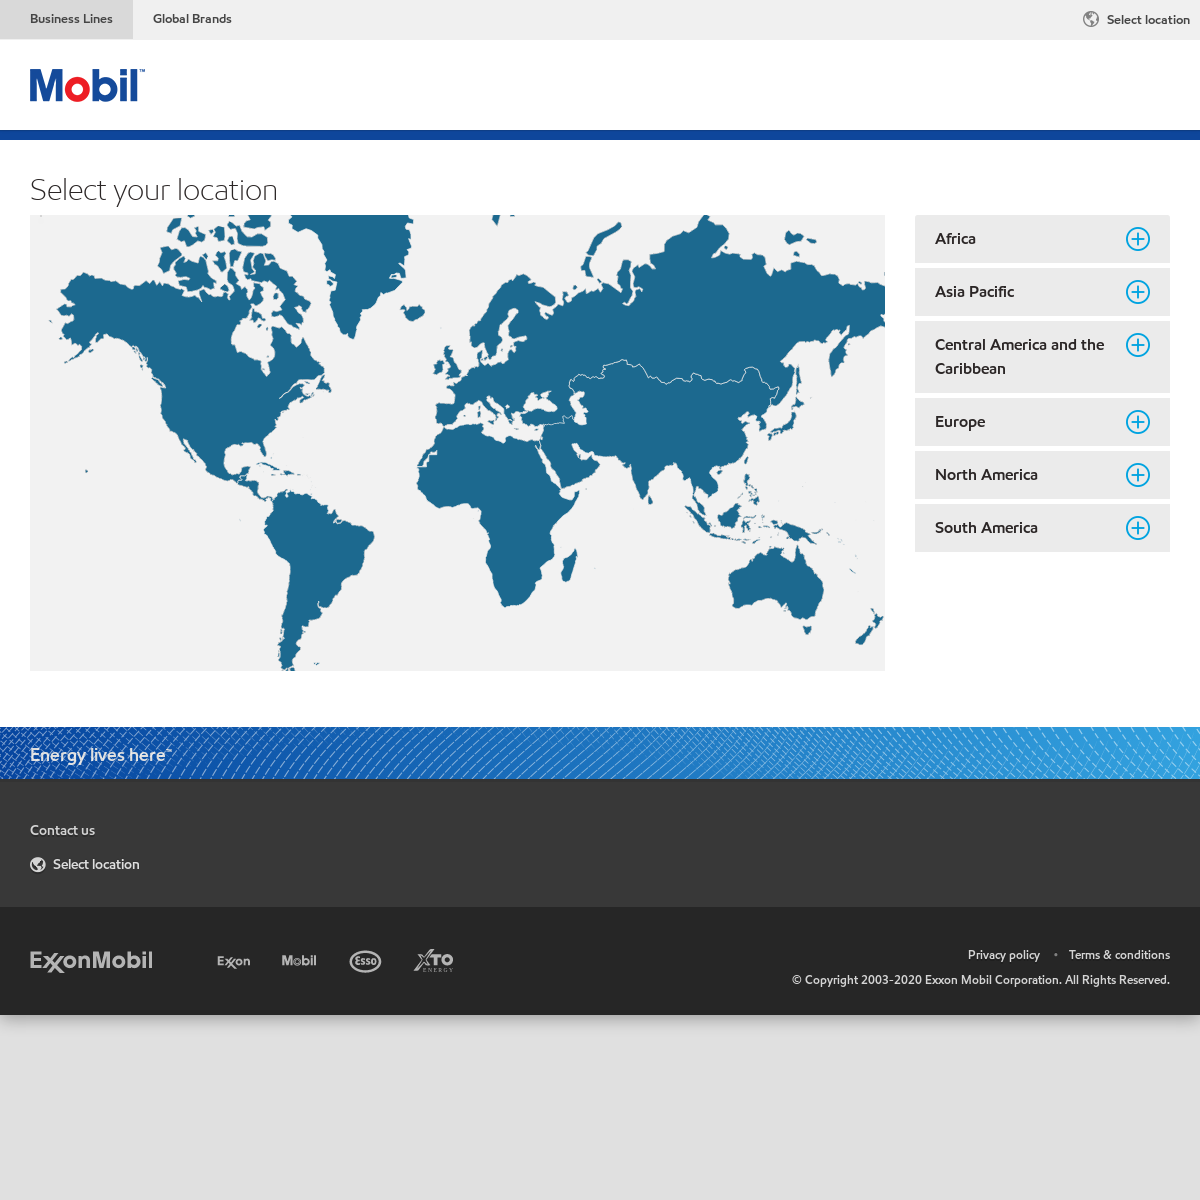 A complete backup of mobil.com